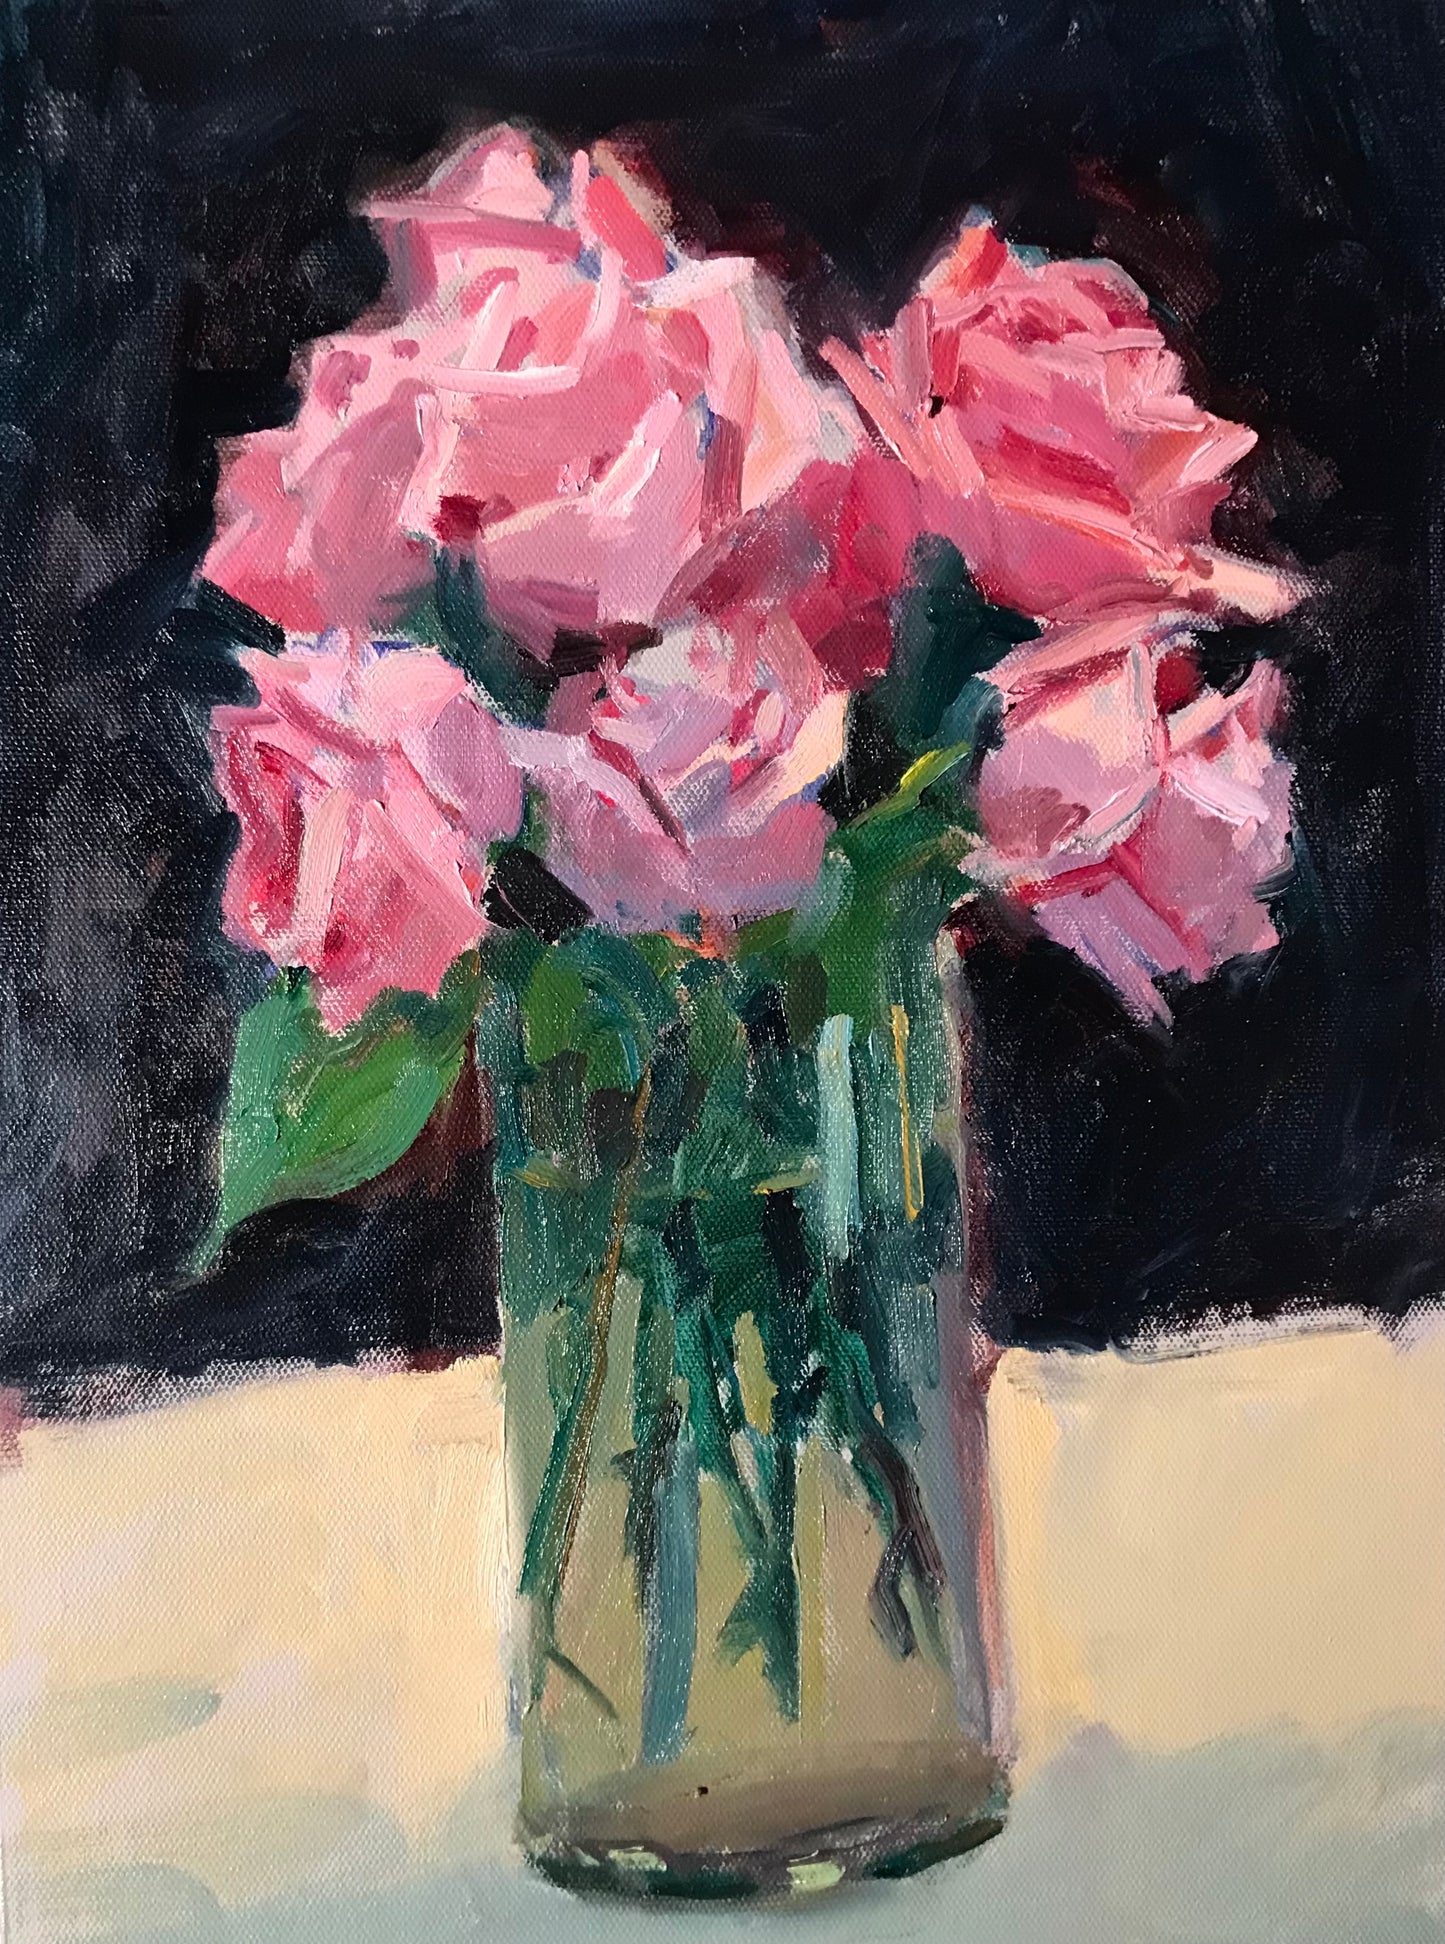 Roses in July (16 x 12 Inches)